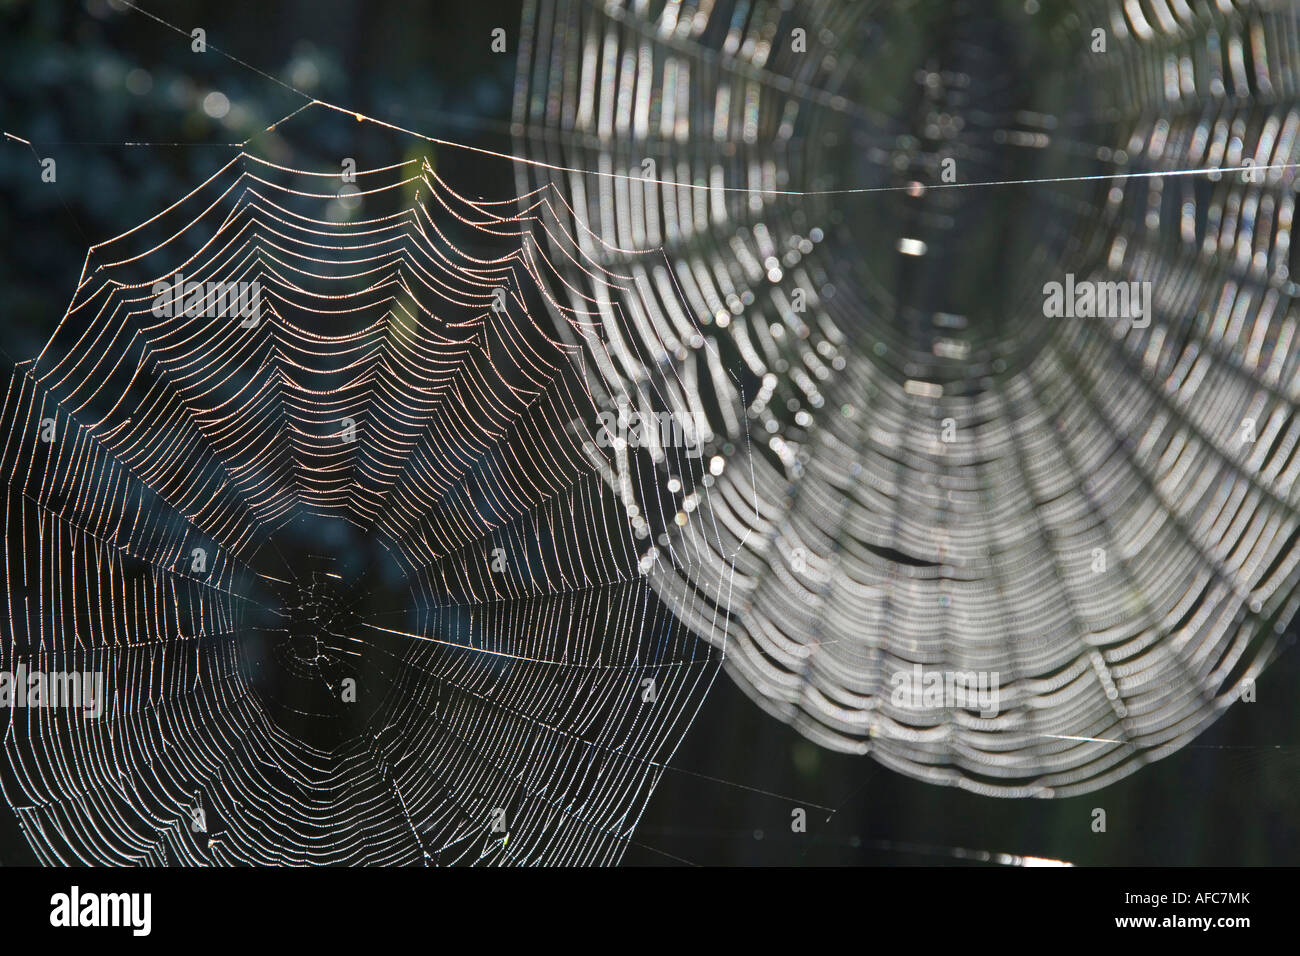 Detail of two spiders webs against a dark background Stock Photo